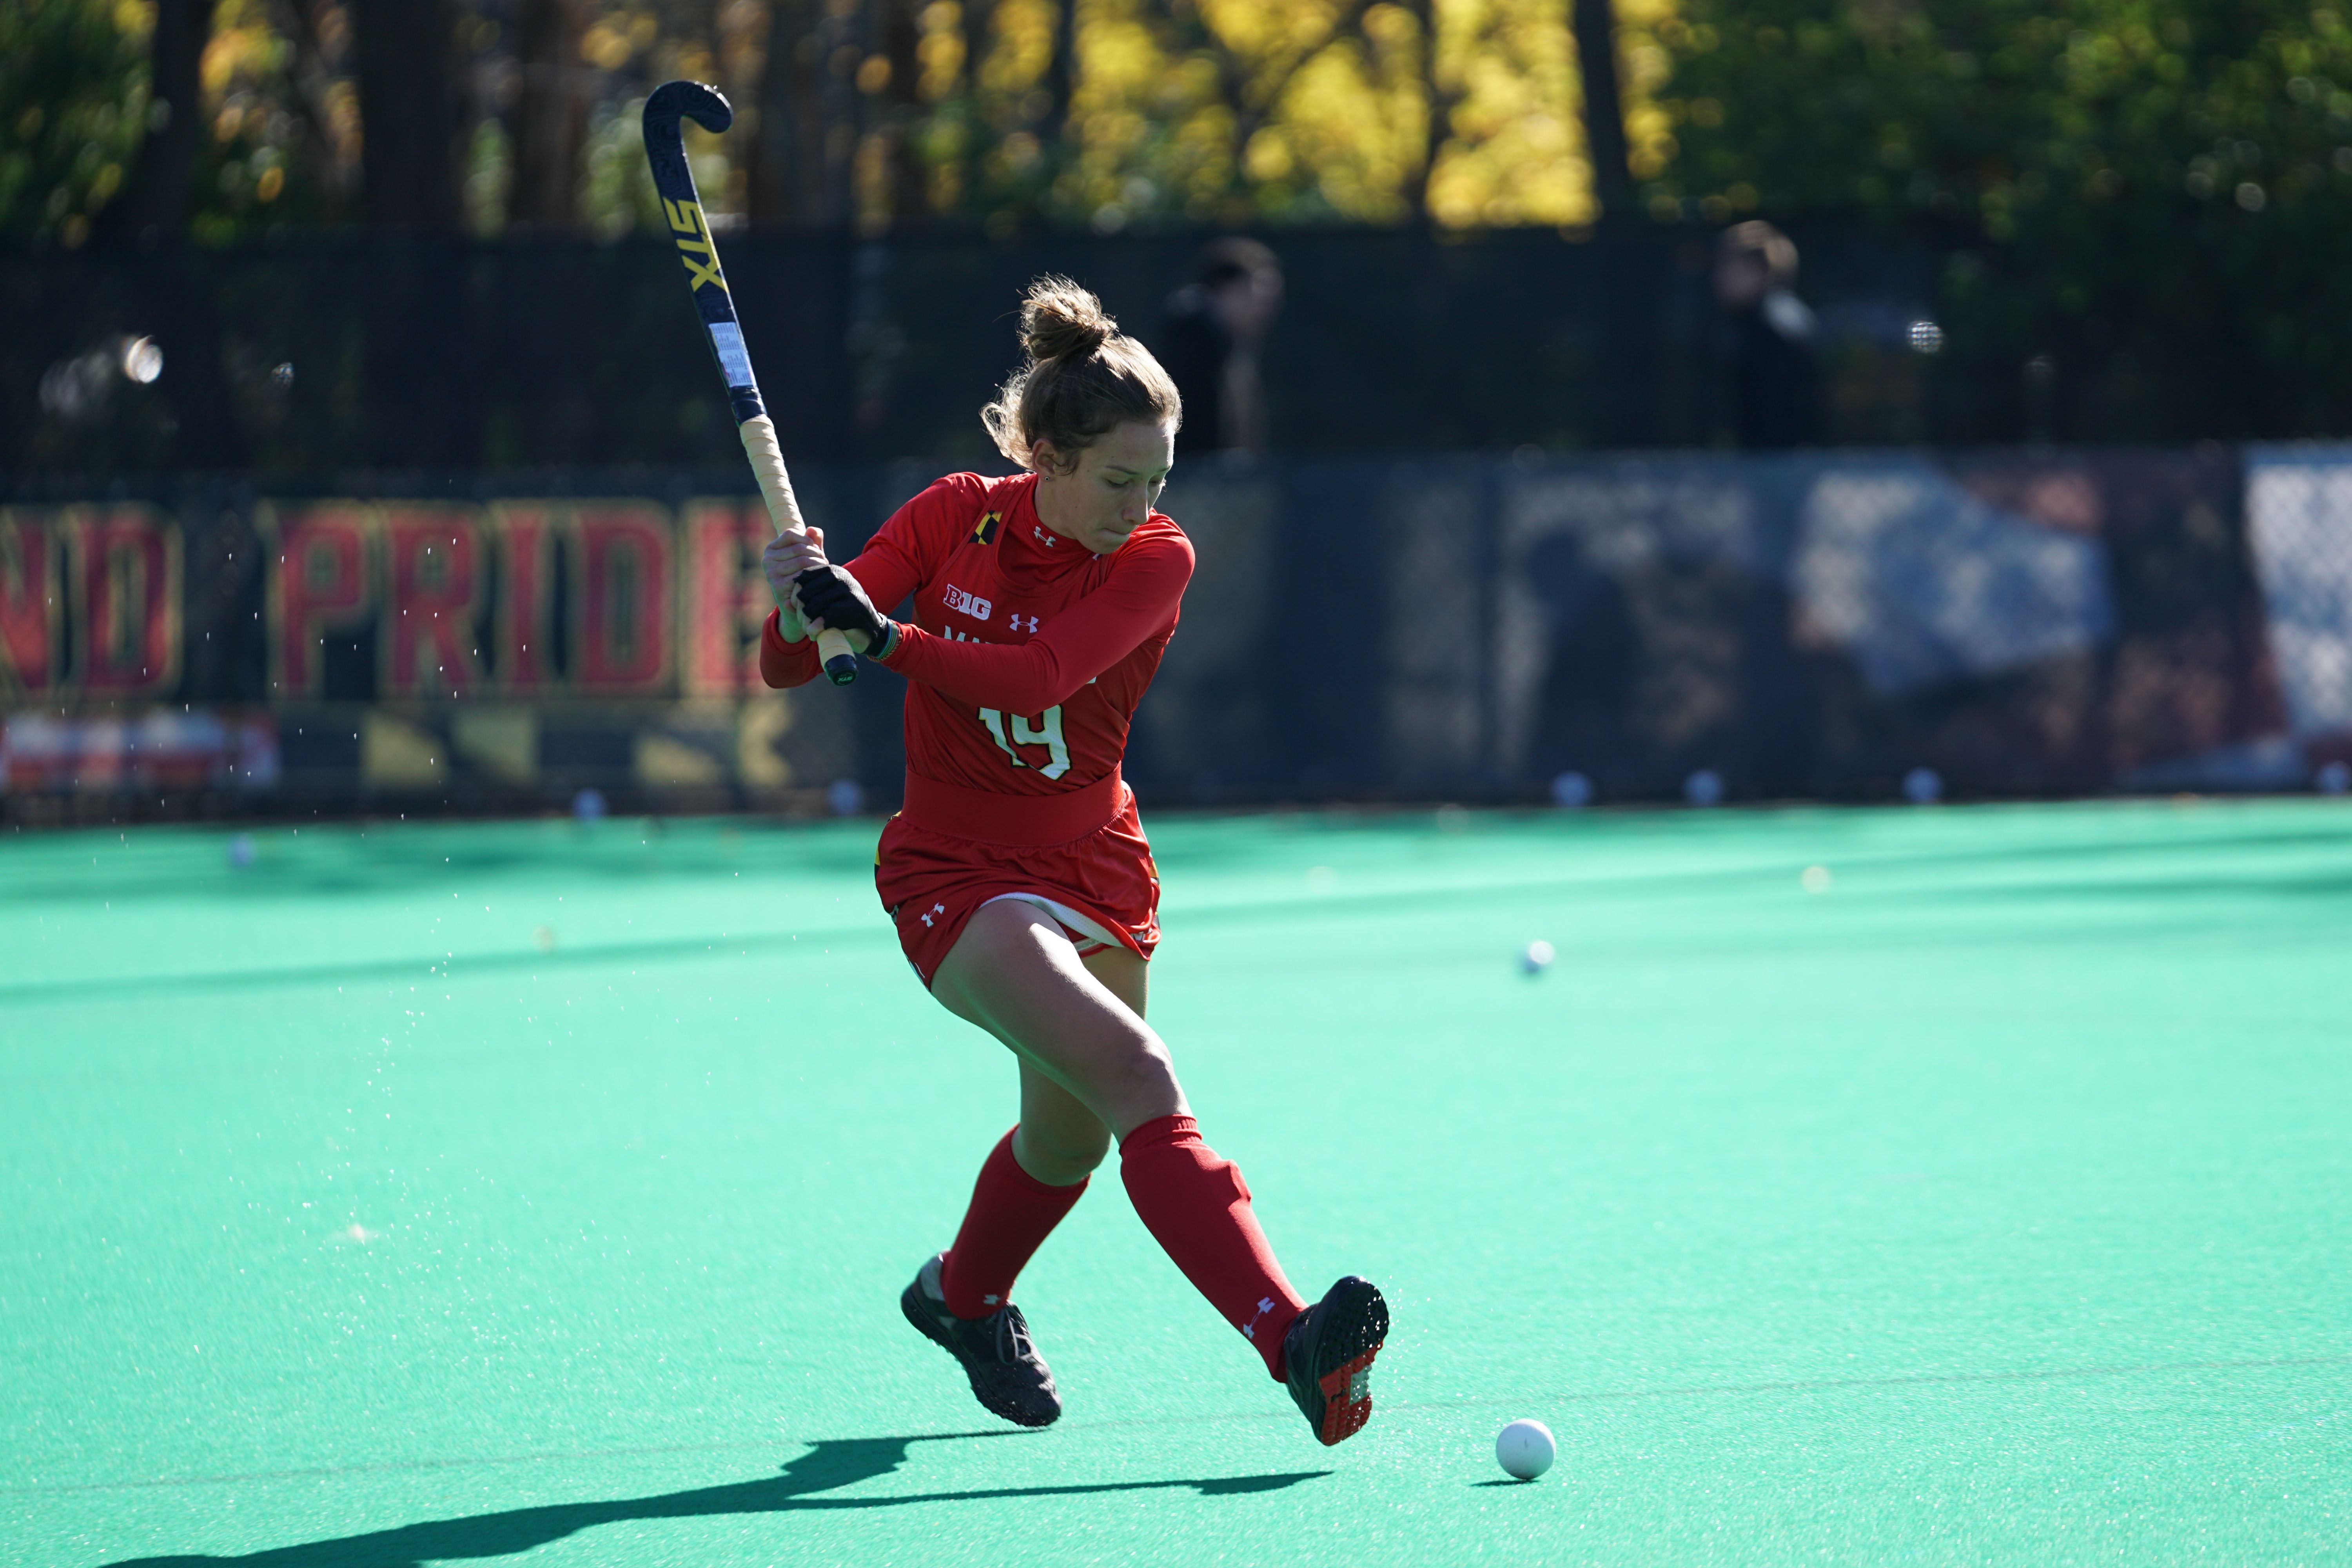 Field Hockey Picture. Download Free Image